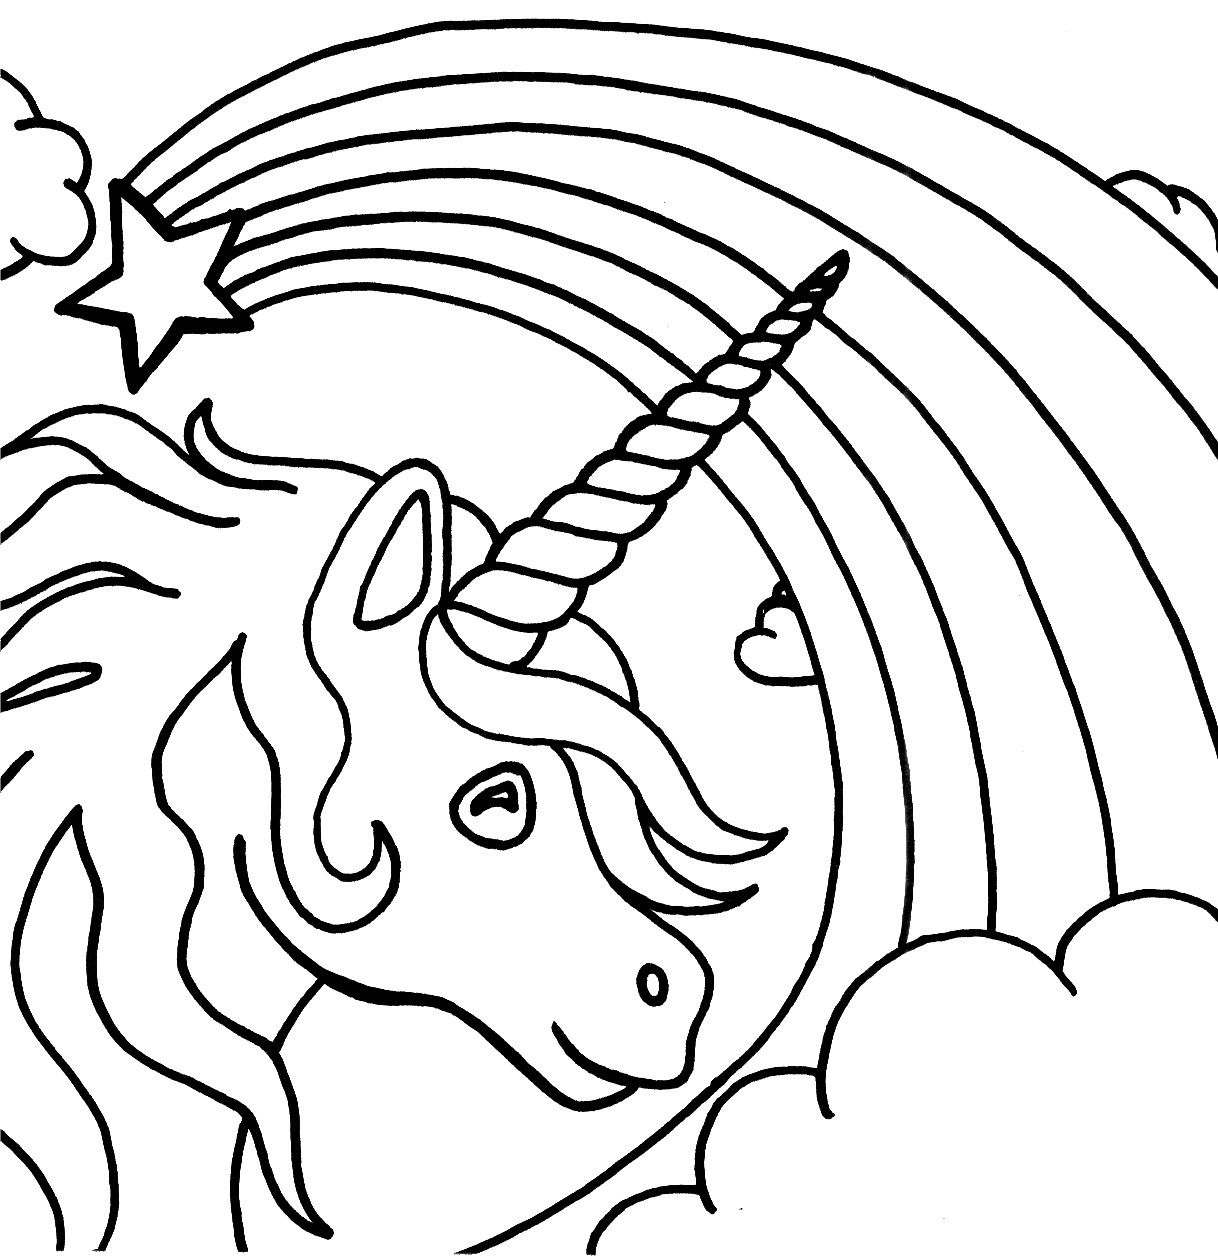 Fun Coloring Pages For Teens Online For Free
 my little pony unicorn coloring pages gallery photos 45